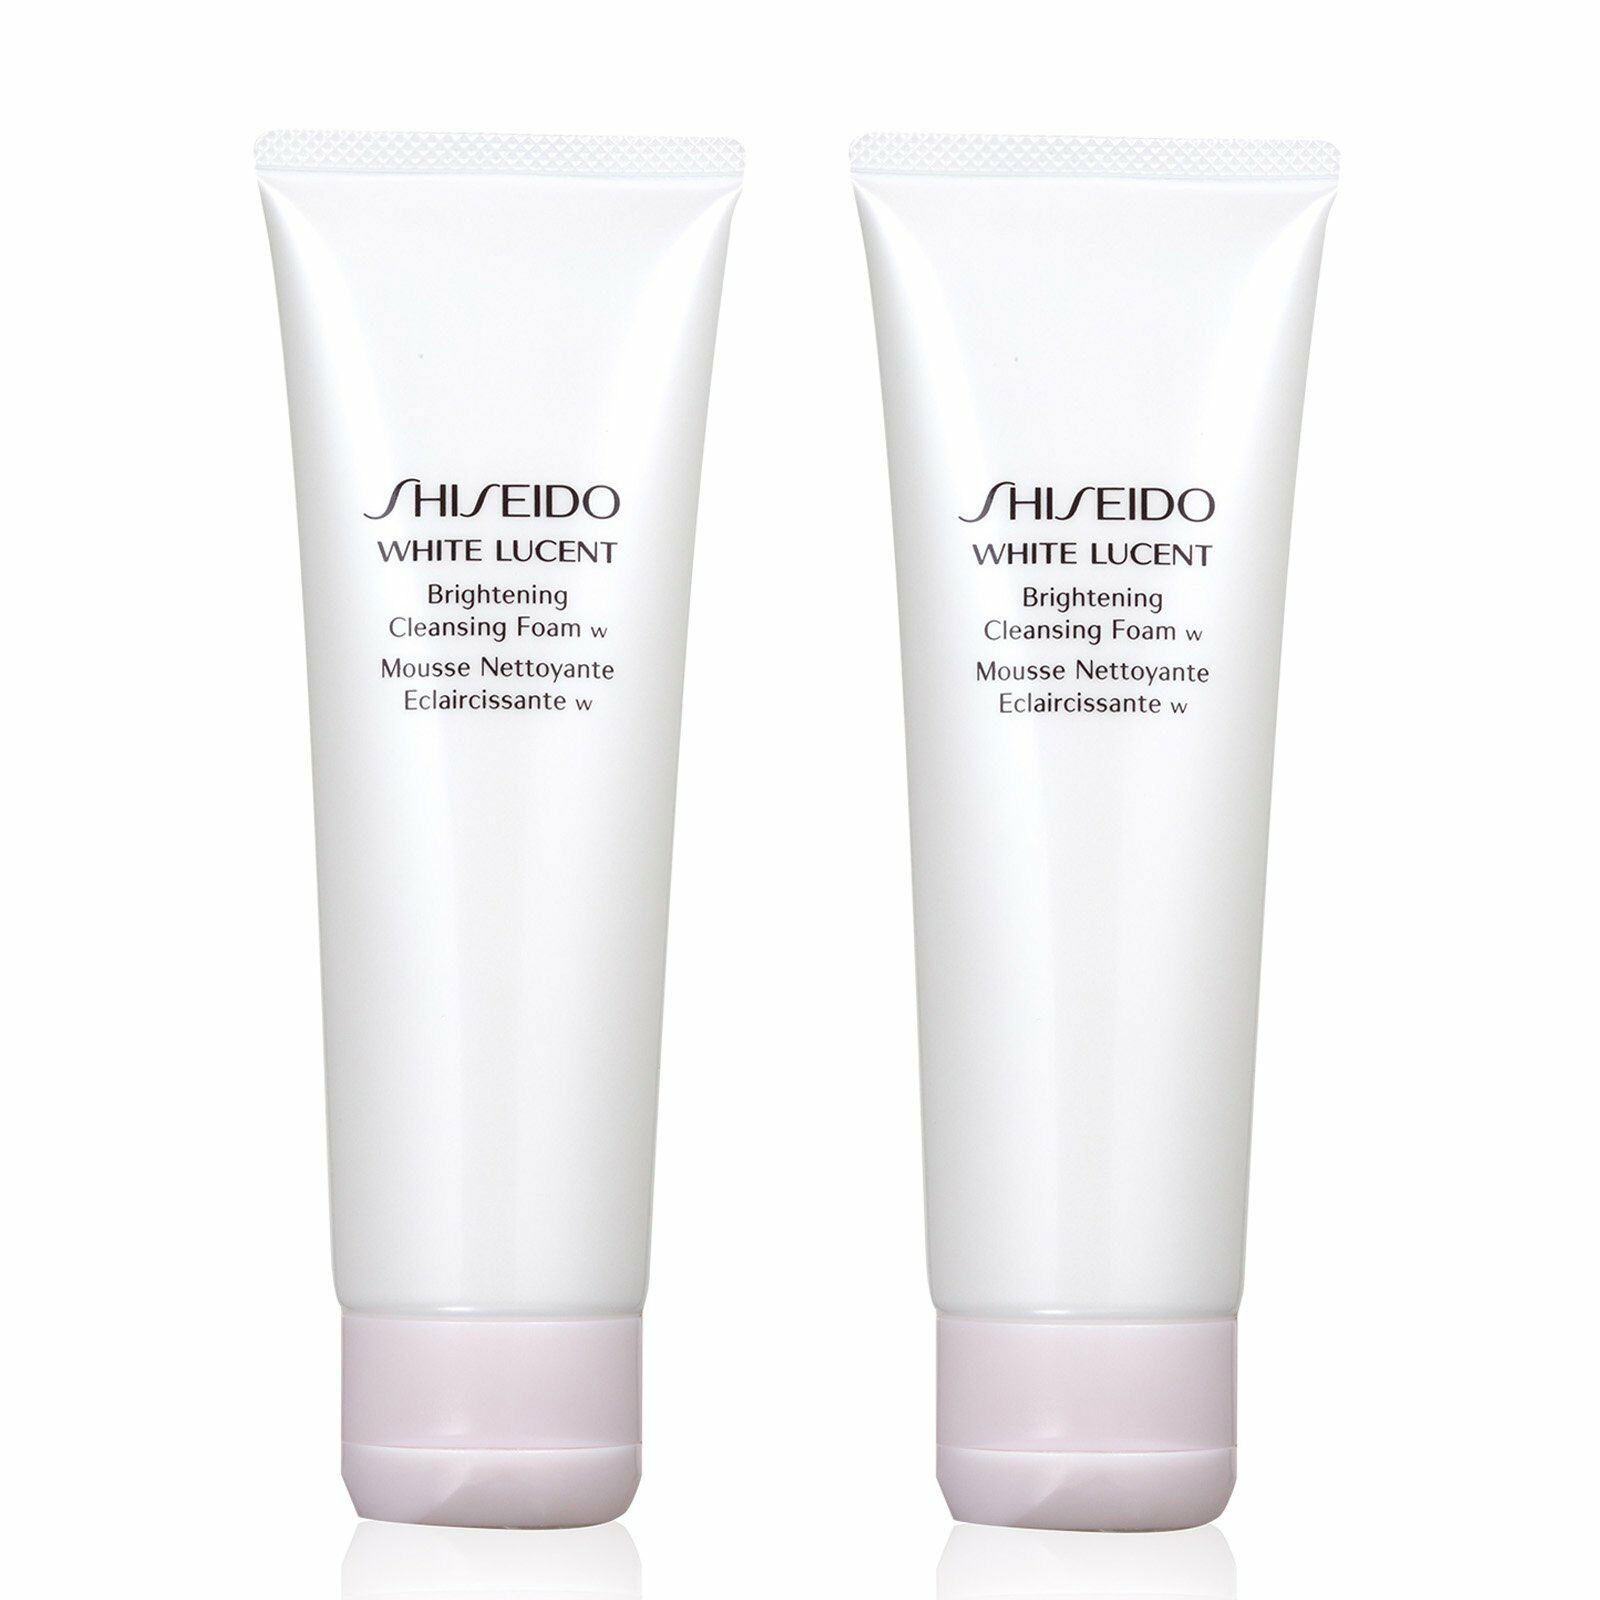 Brightening cleanser. Shiseido White Lucent. Санскрит шисейдо White Lucent. Rose extract Brightening Cleanser.